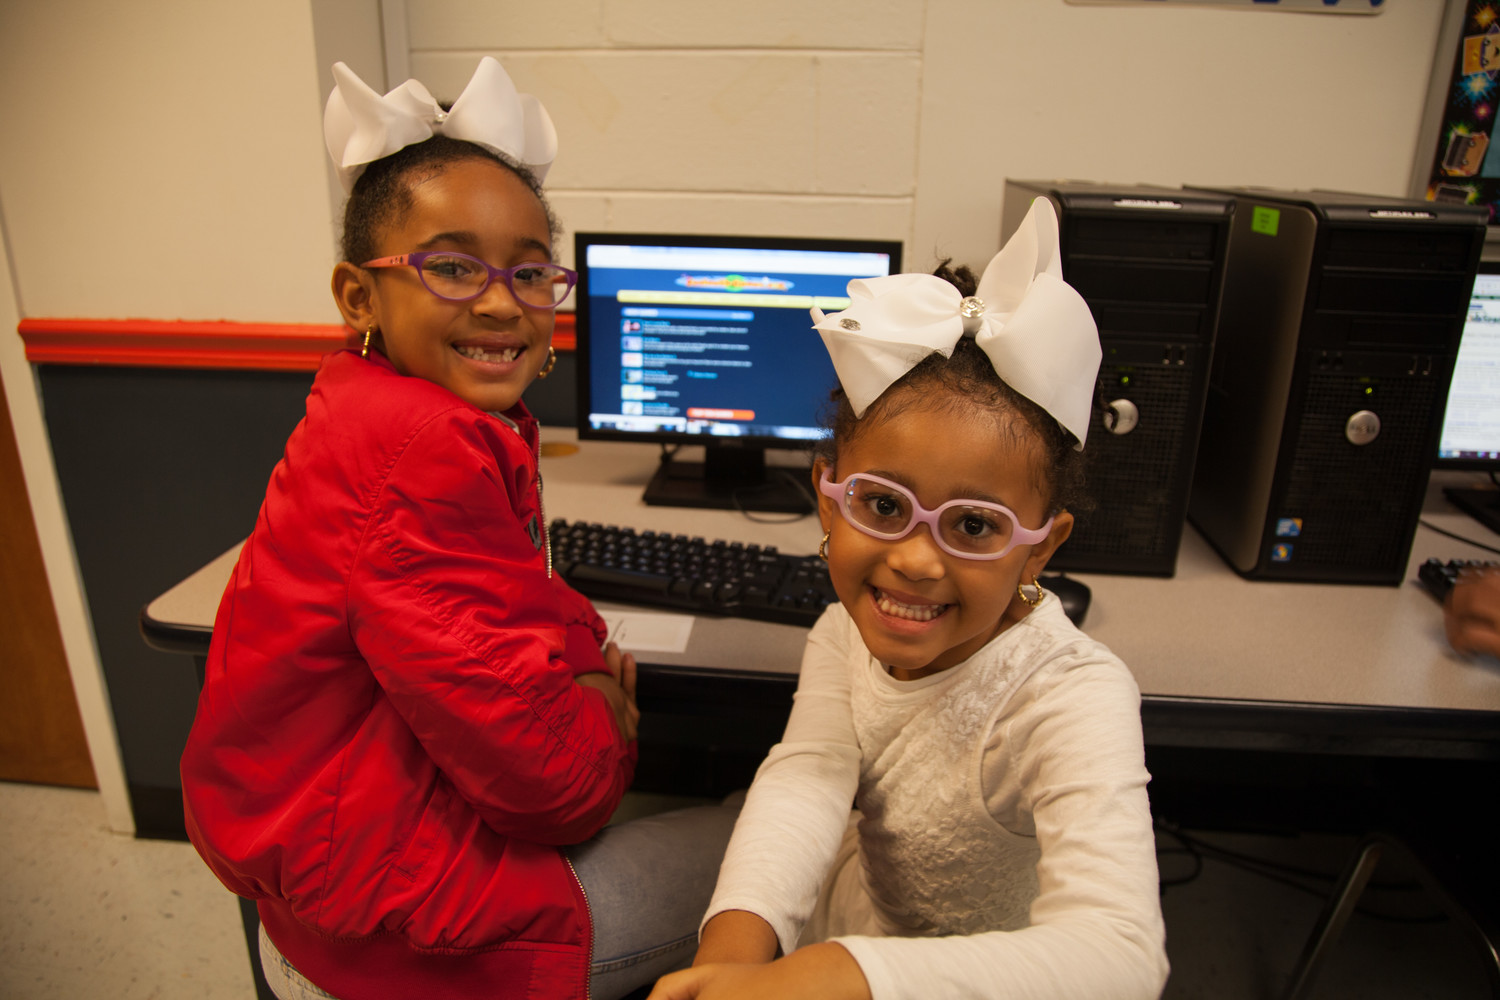 Sisters Arihanna and A’Sani Jackson enjoyed their time in the Glen Cove Boys & Girls Club computer room.